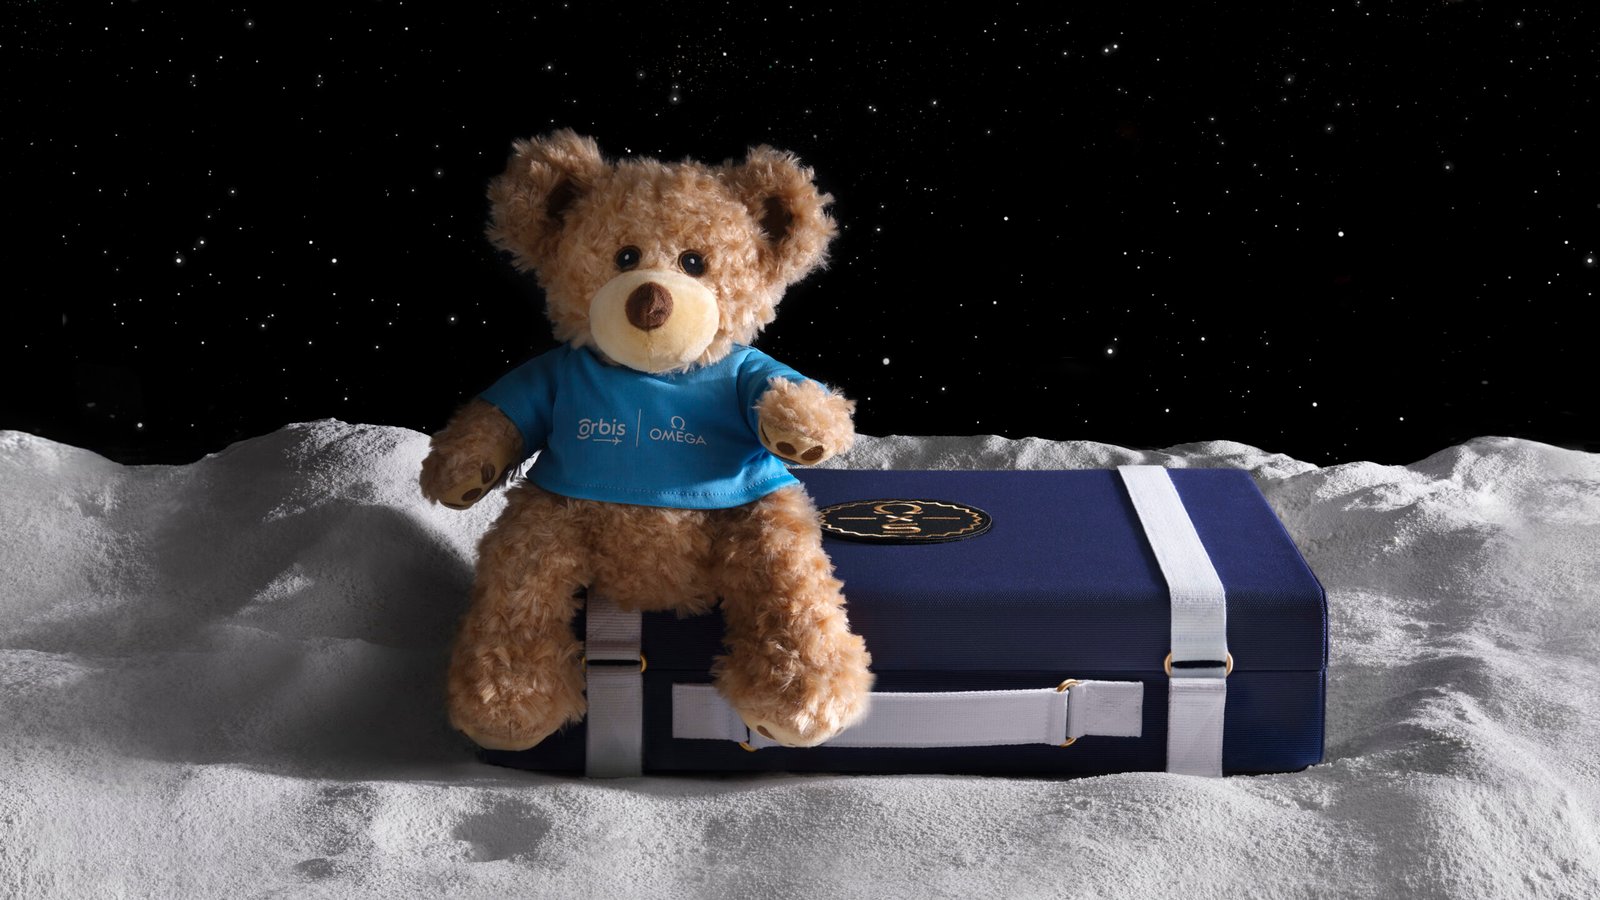 11 MoonSwatch Moonshine Gold suitcases to be auctioned at Sothebys by OMEGA for Orbis